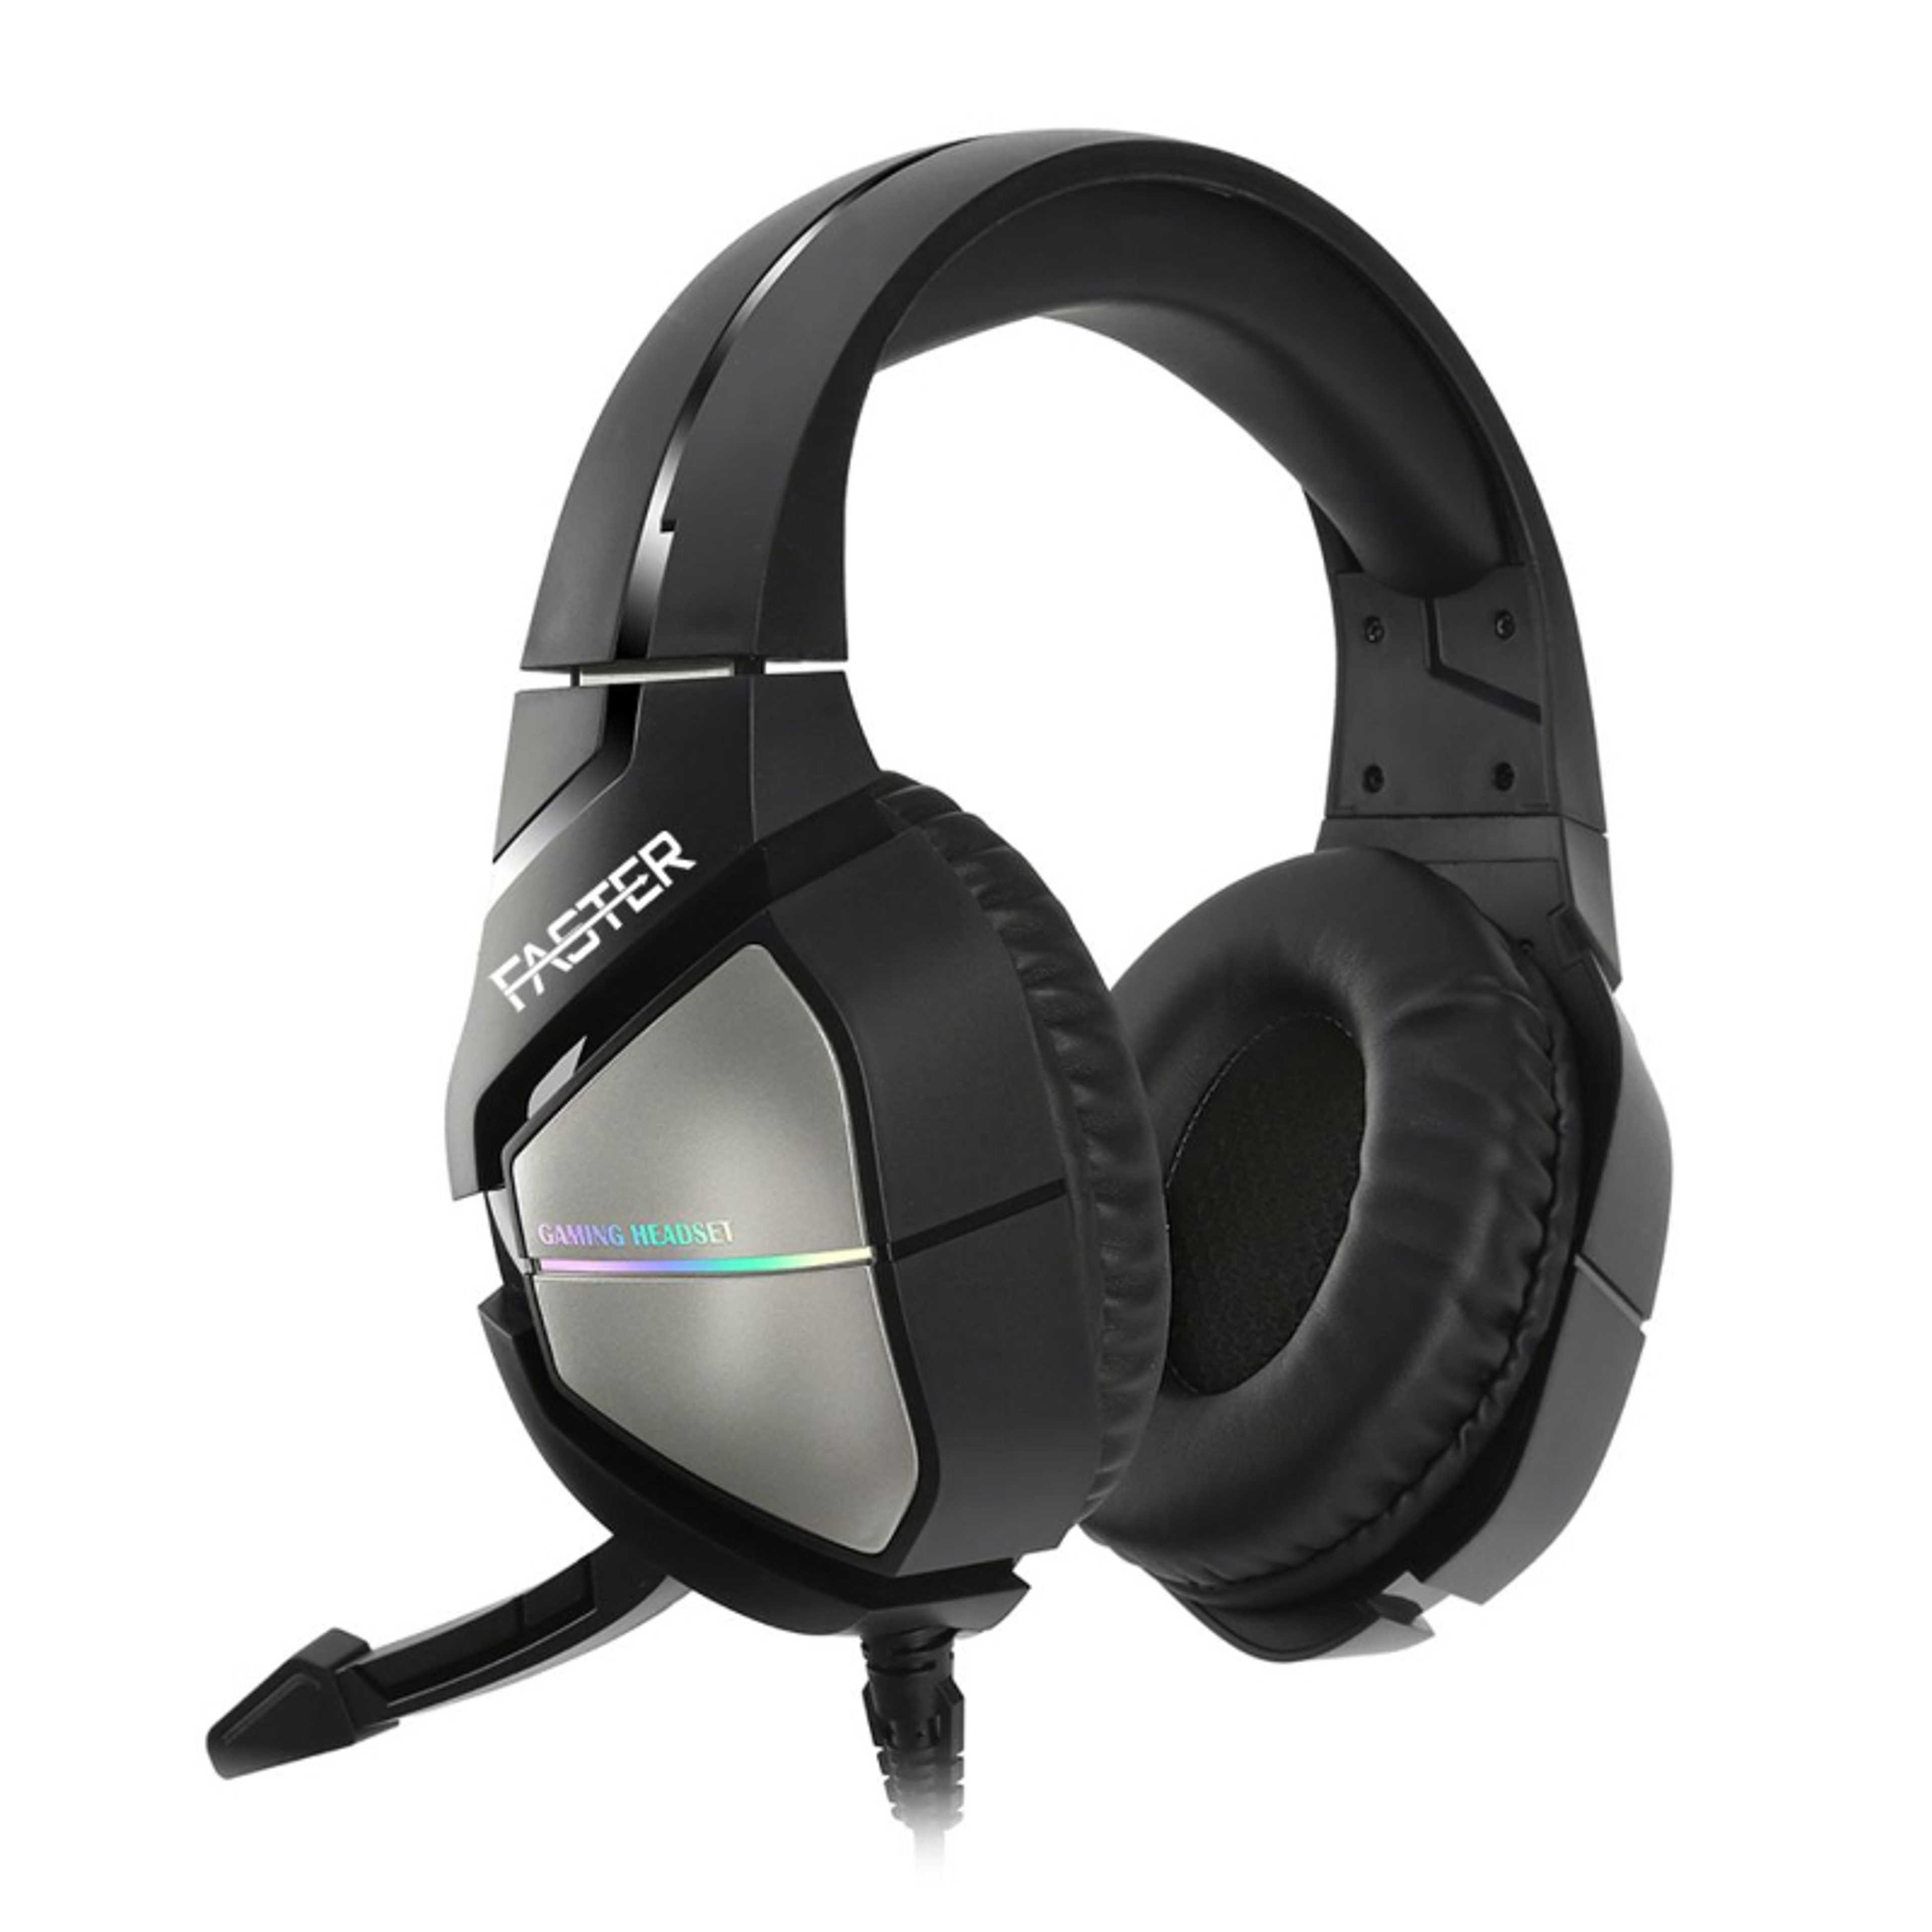 FASTER Blubolt BG-200 Surrounding Sound Gaming Headset with Noise Cancelling Microphone for PC and Mobile